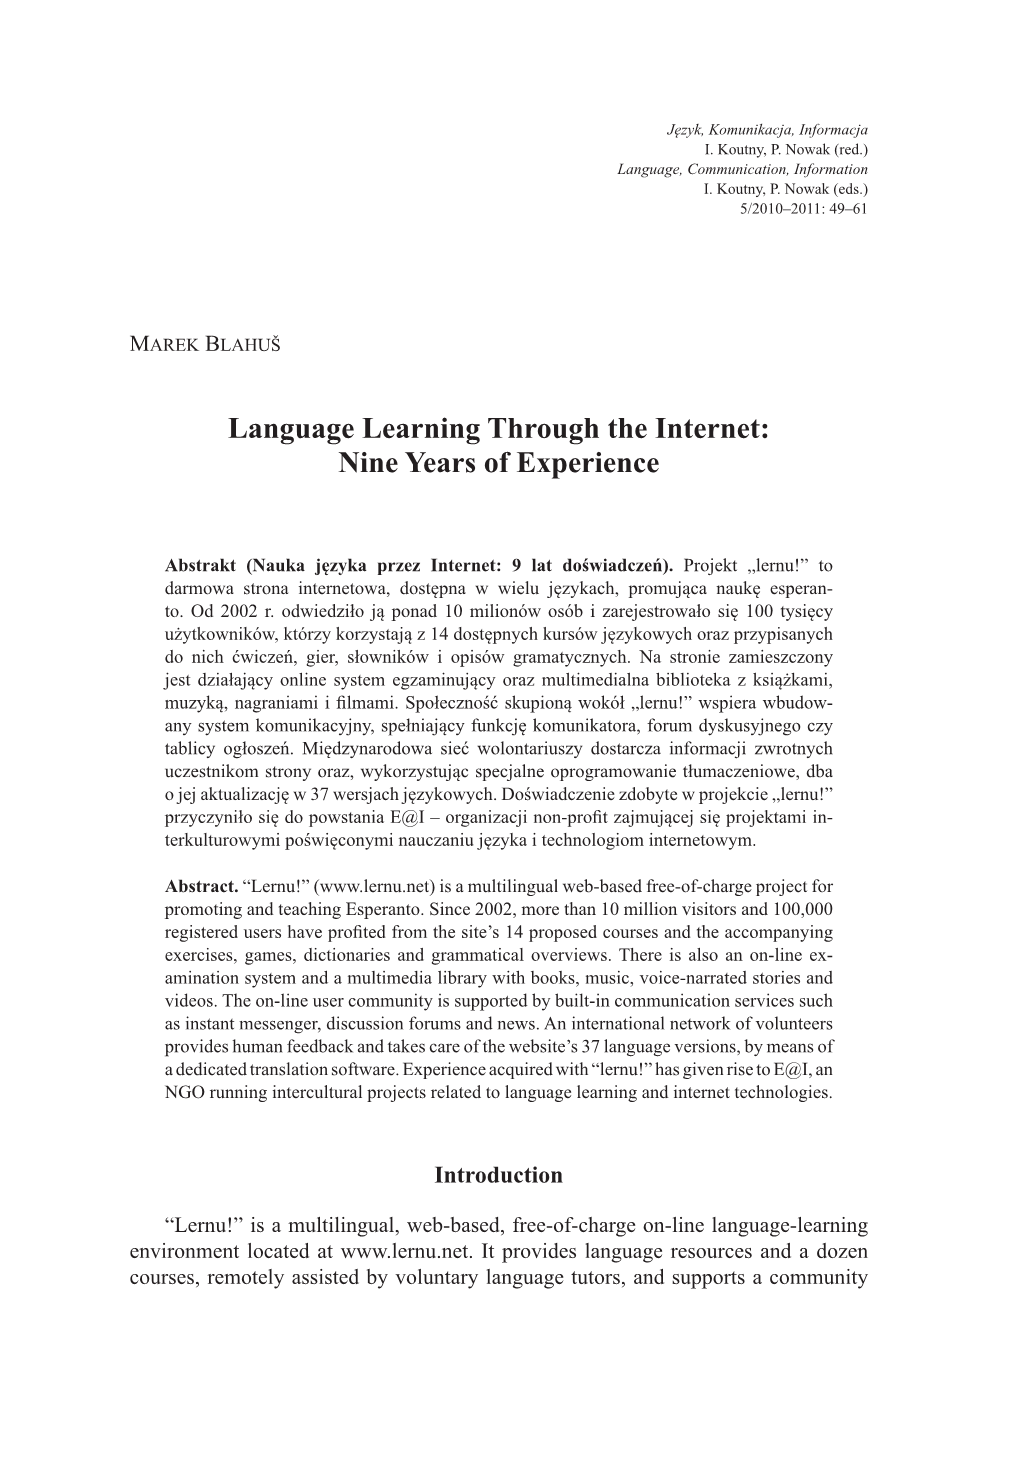 Language Learning Through the Internet: Nine Years of Experience